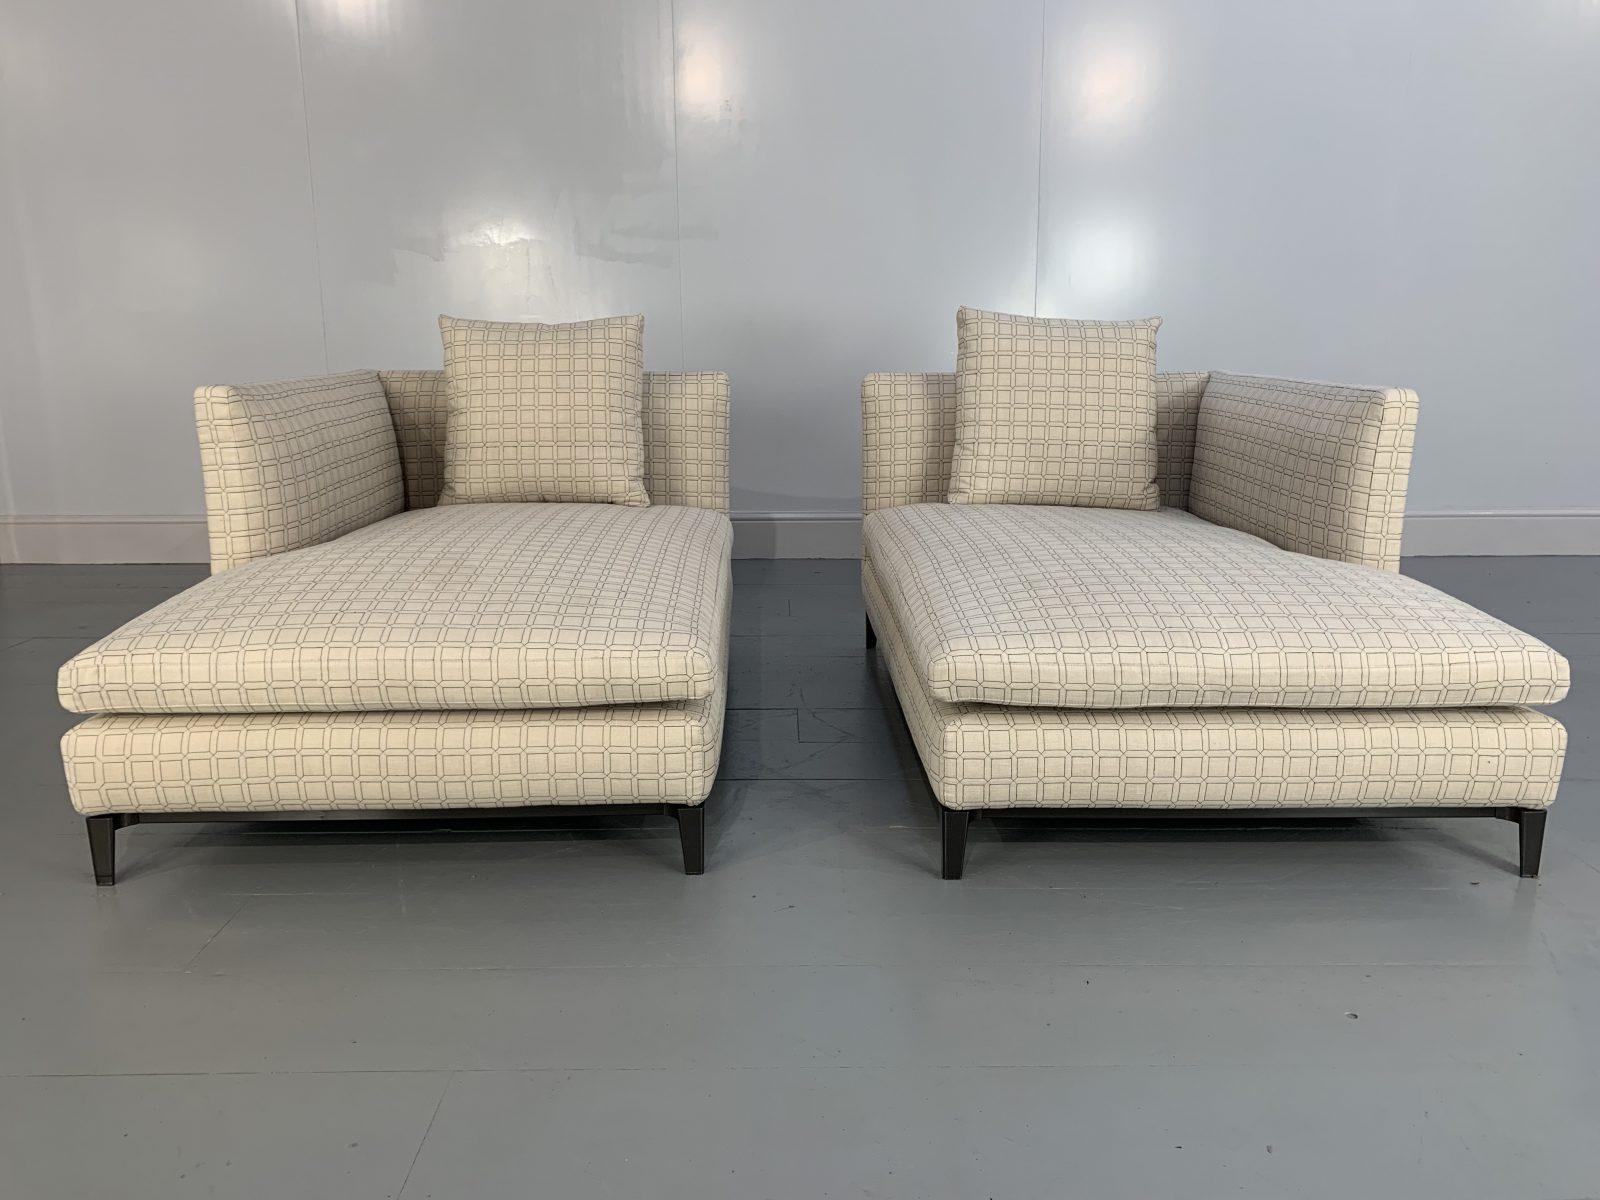 Contemporary Superb Pair of Minotti “Andersen” Chaise Sofas Daybed in Geometric Linen Fabric For Sale